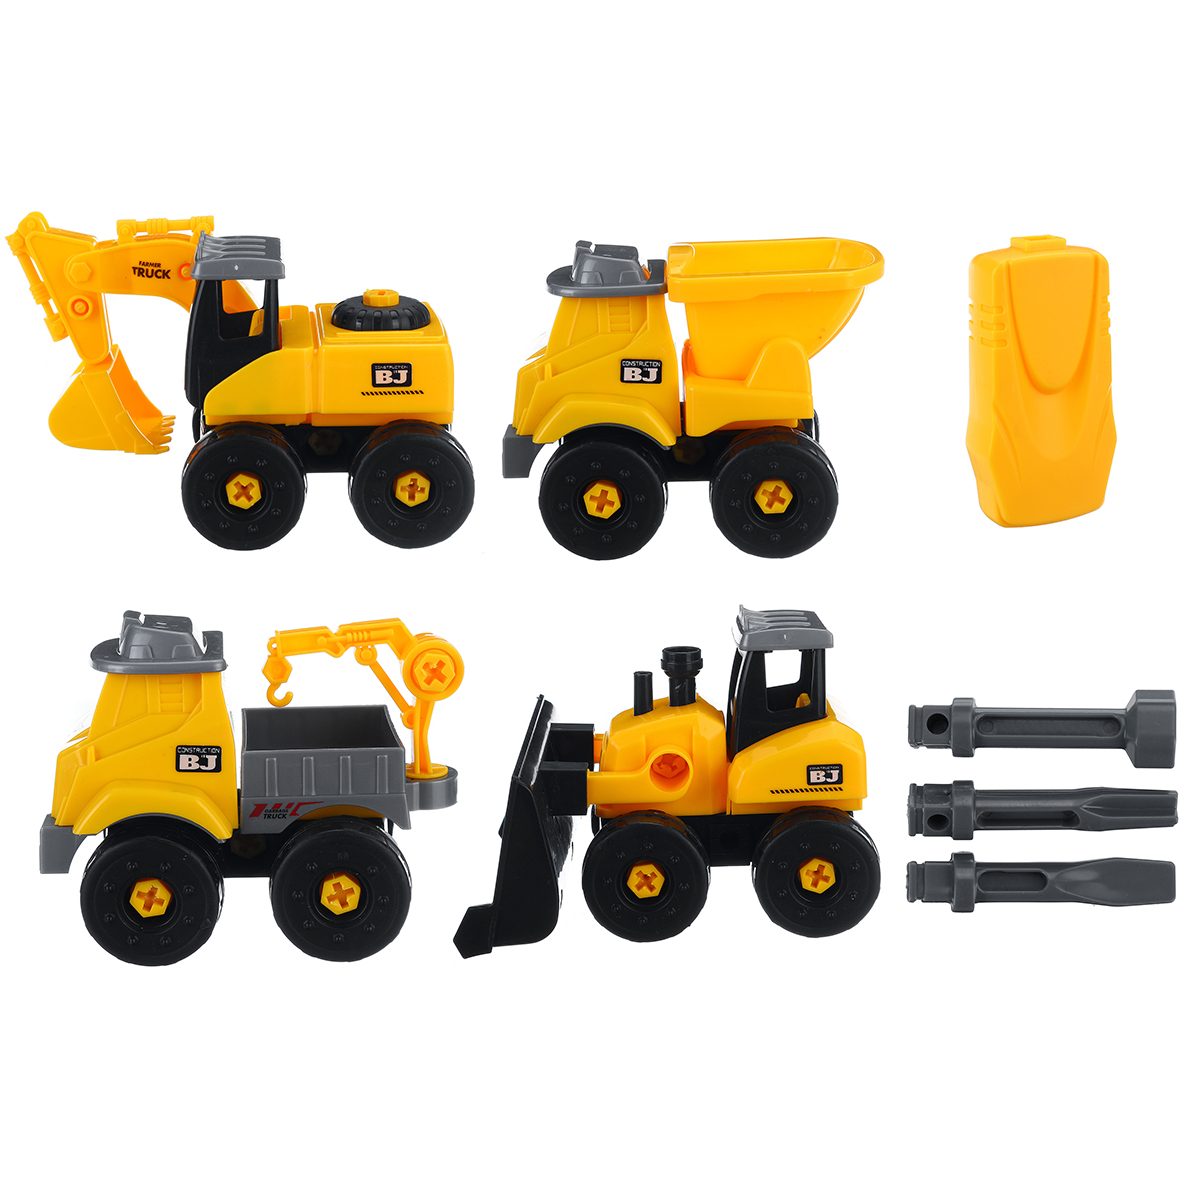 4-IN1-Truck-Construction-Sliding-Vehicle-Excavator-Detachable-Assembly-Screw-Nut-Puzzle-DIY-Assembly-1838453-1